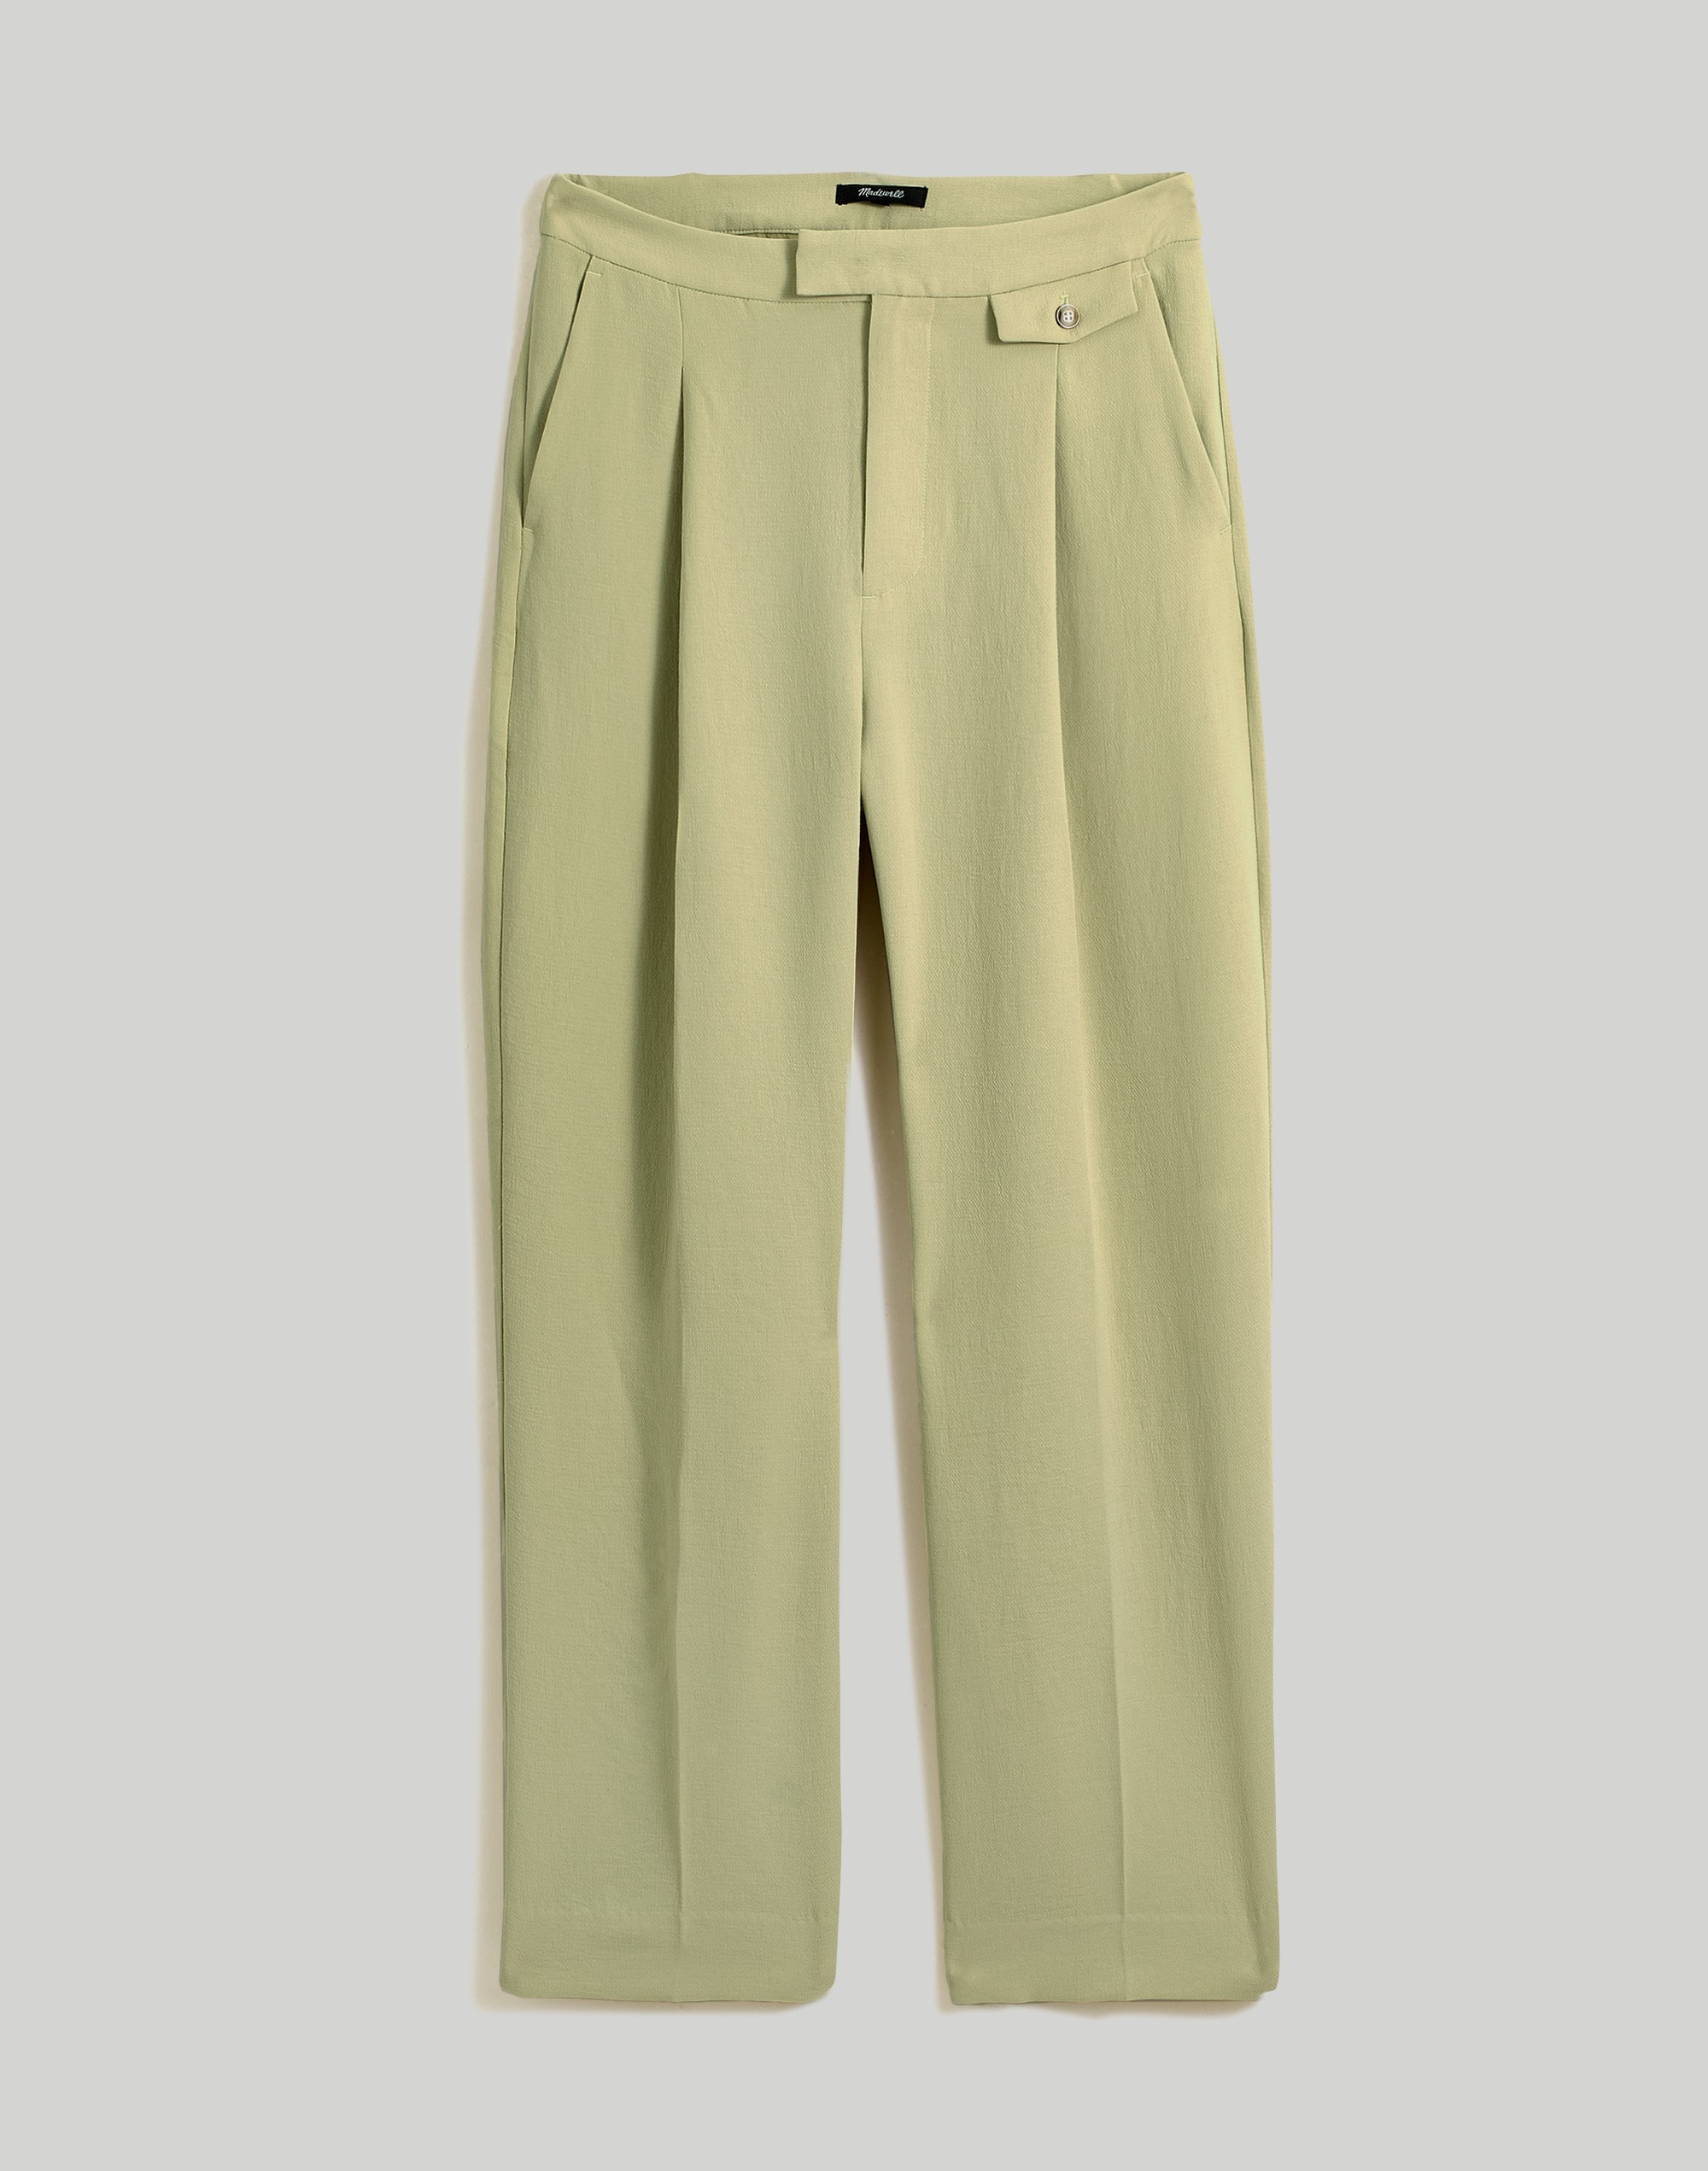 The Plus Rosedale High-Rise Straight Pant in Crepe